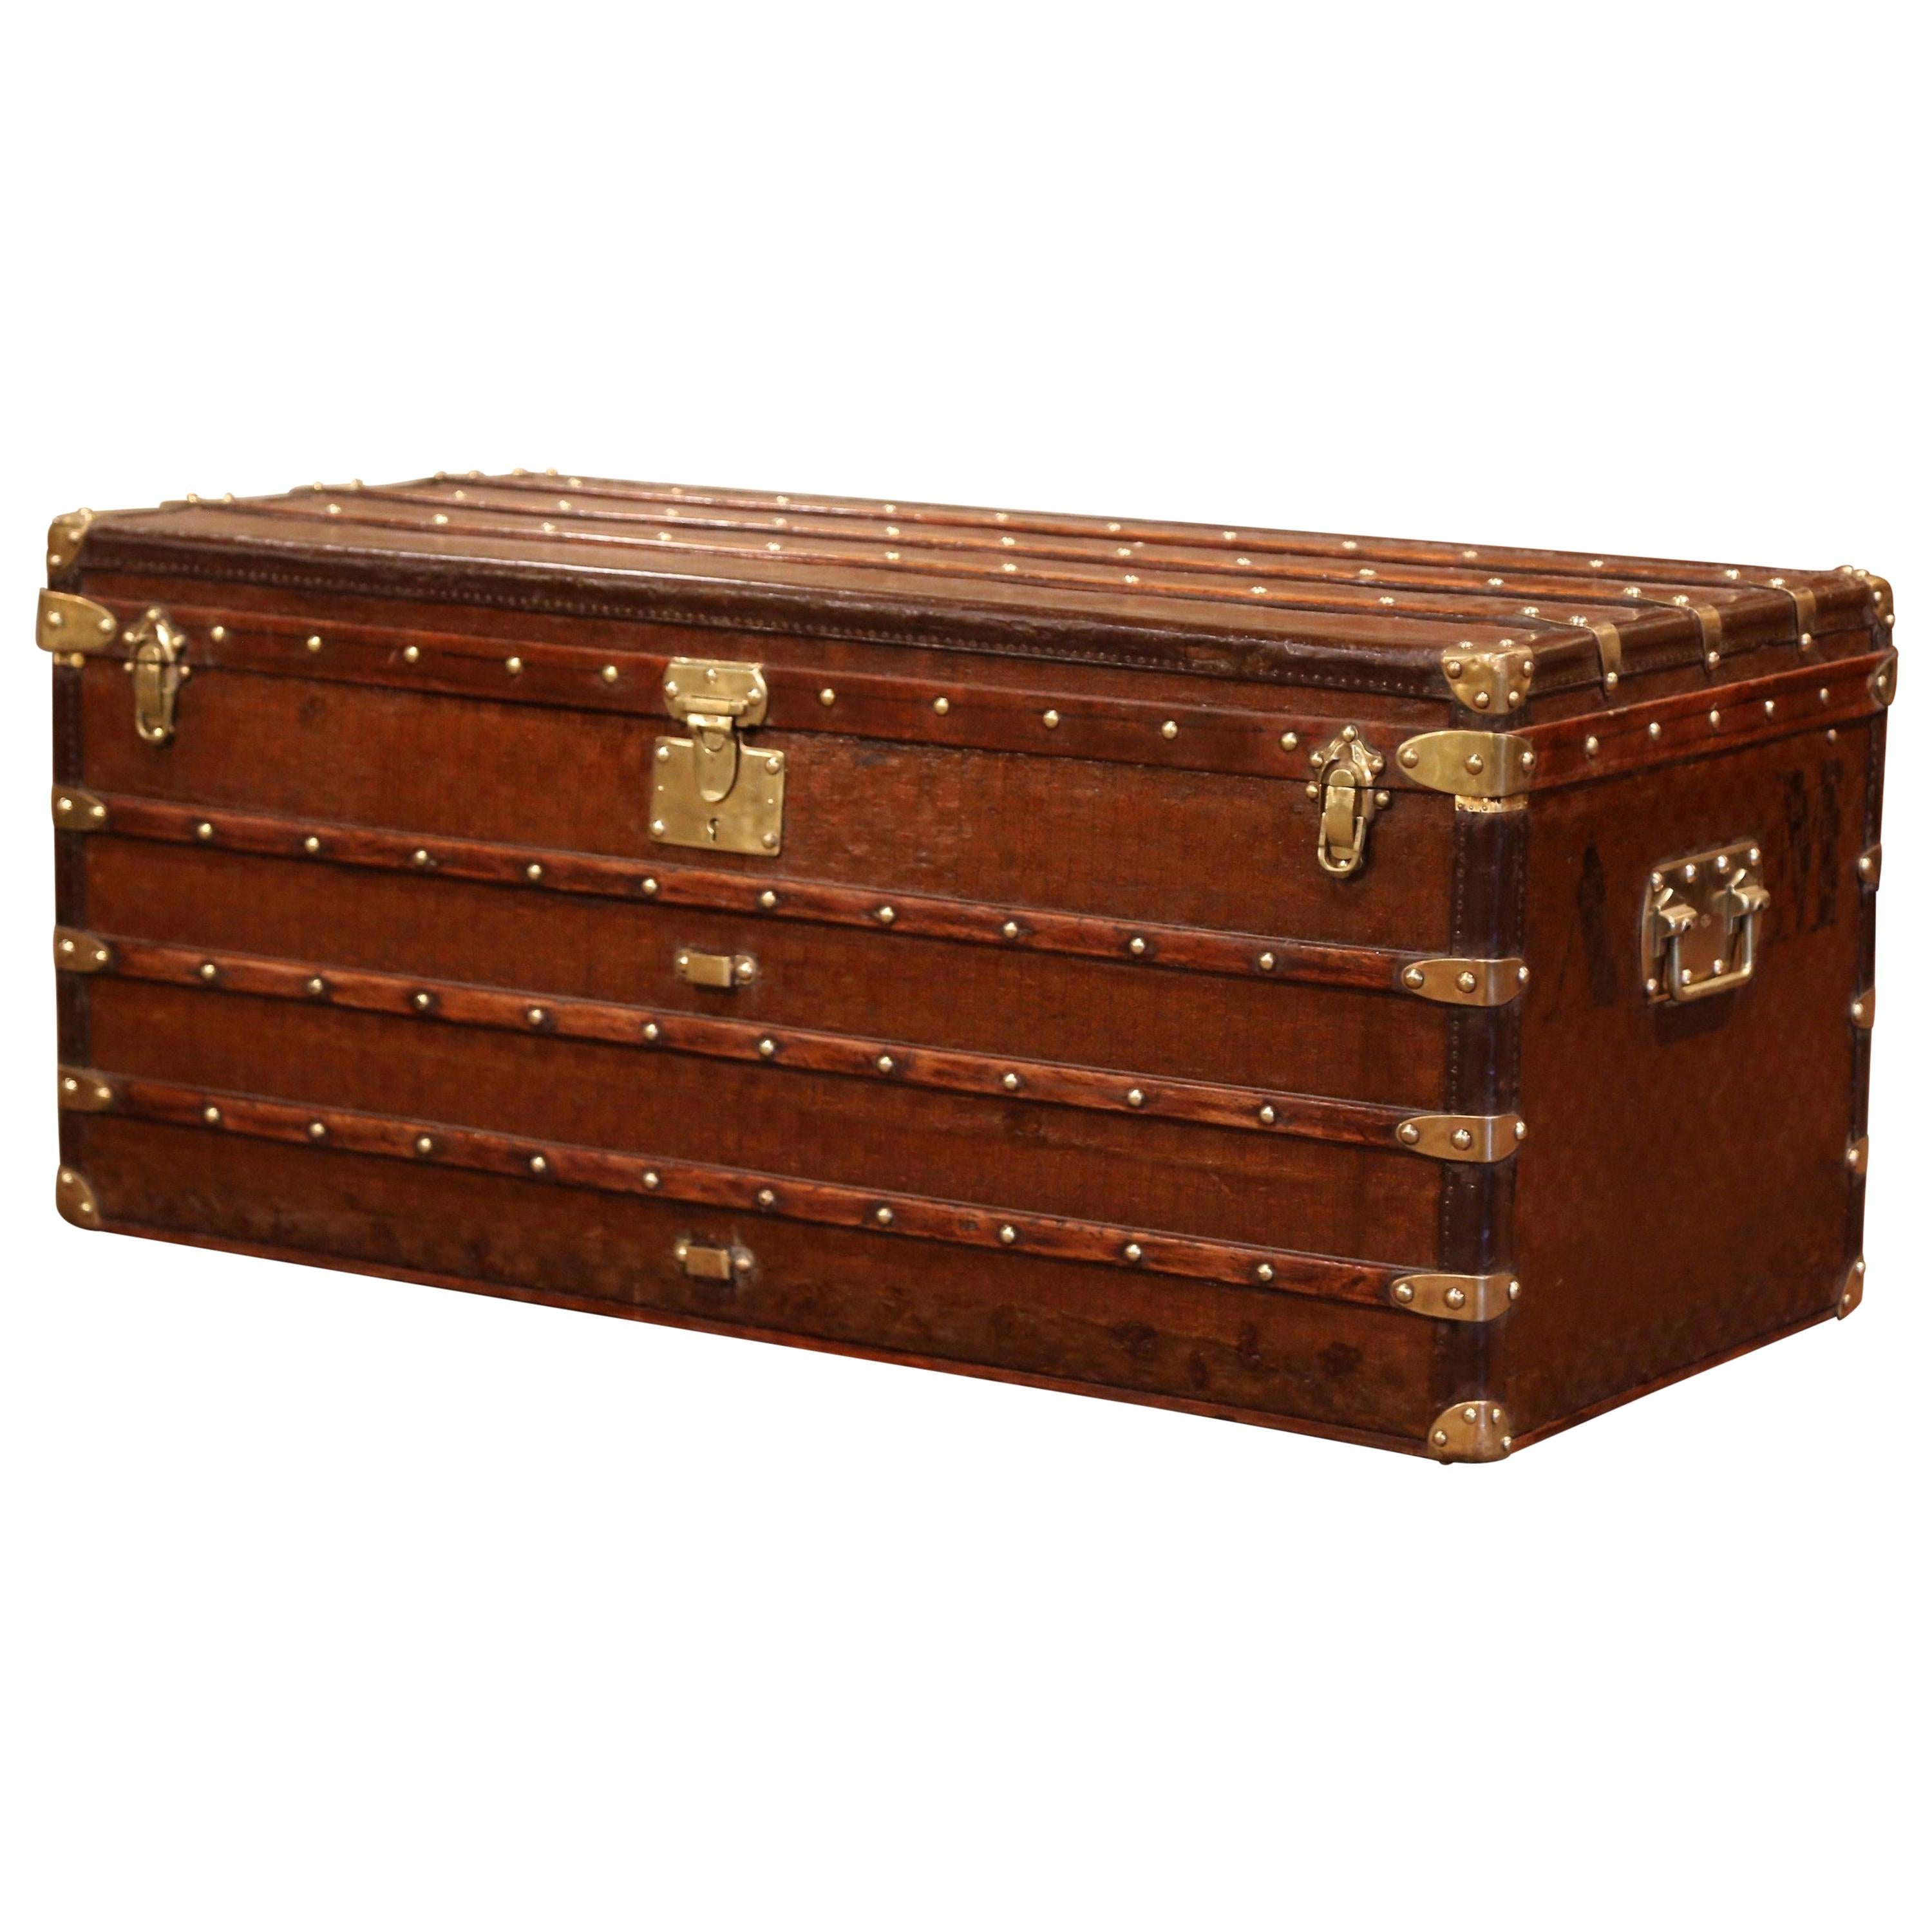 19th Century French Iron Brass and Leather Travel Trunk Vuitton Style